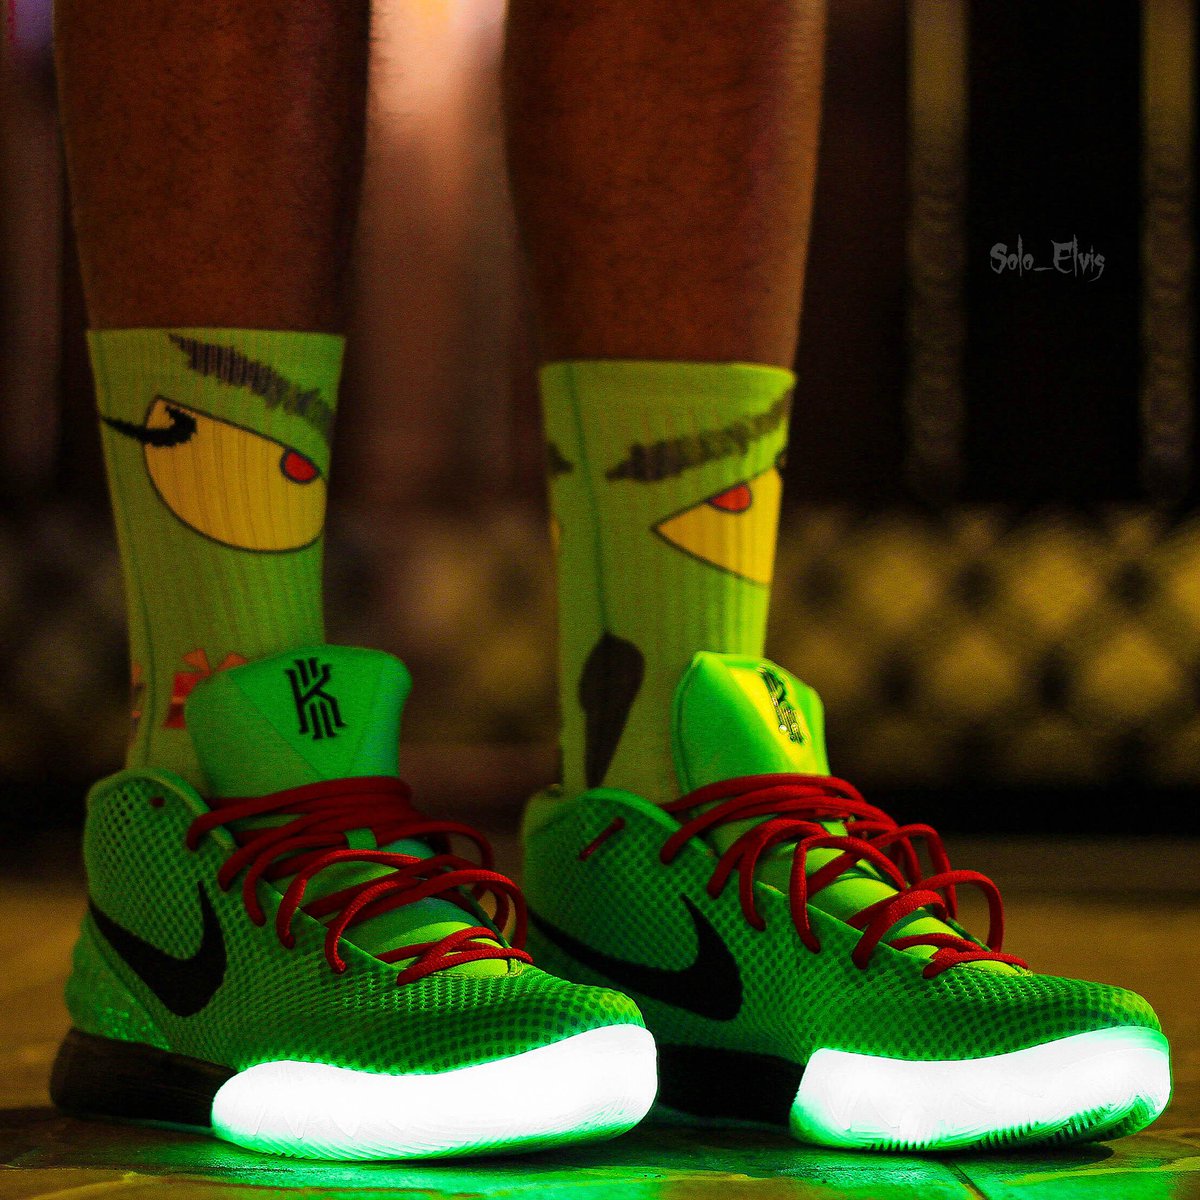 sexual Regeneración Mil millones HoopSwagg on Twitter: "'Grinch' custom elites and matching Nike ID Kyries!  Check out all of our socks at http://t.co/vrYIDk45pS!  http://t.co/jKZ8ZfY9Fb" / Twitter